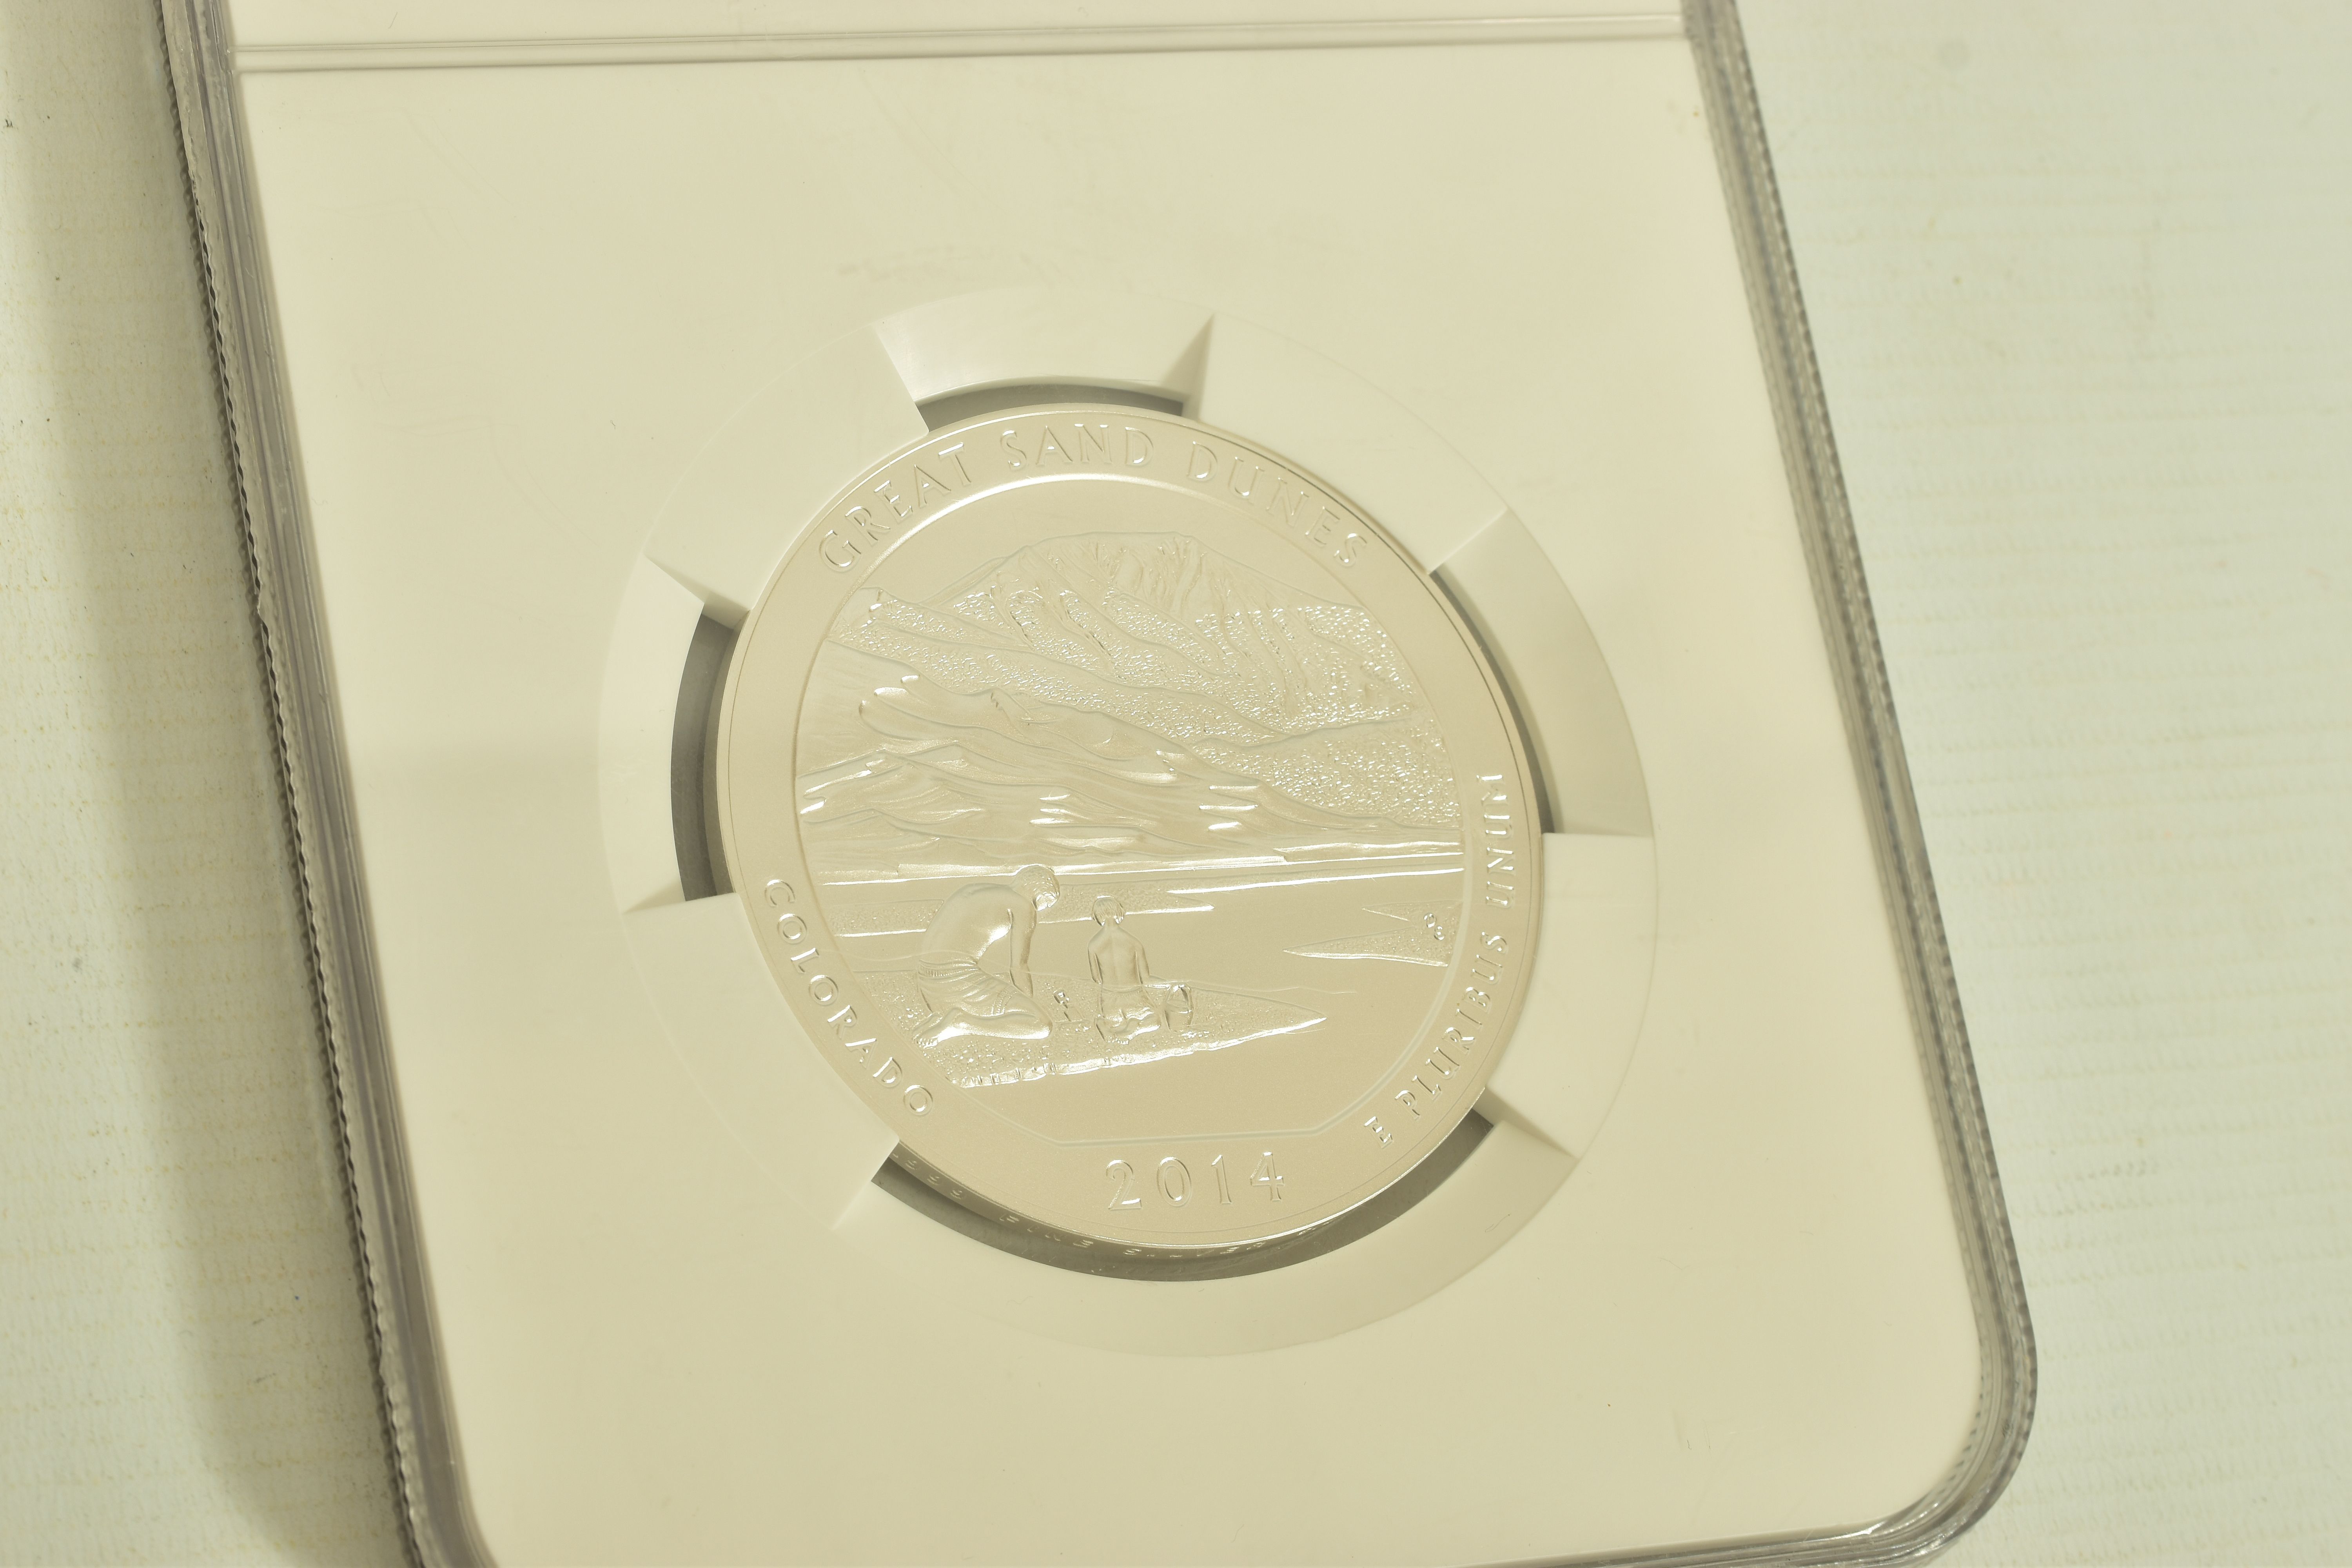 A SILVER UNITED STATES OF AMERICA 5 OZ QUARTER DOLLAR COIN, depicting the Great Sand Dunes of - Image 3 of 3